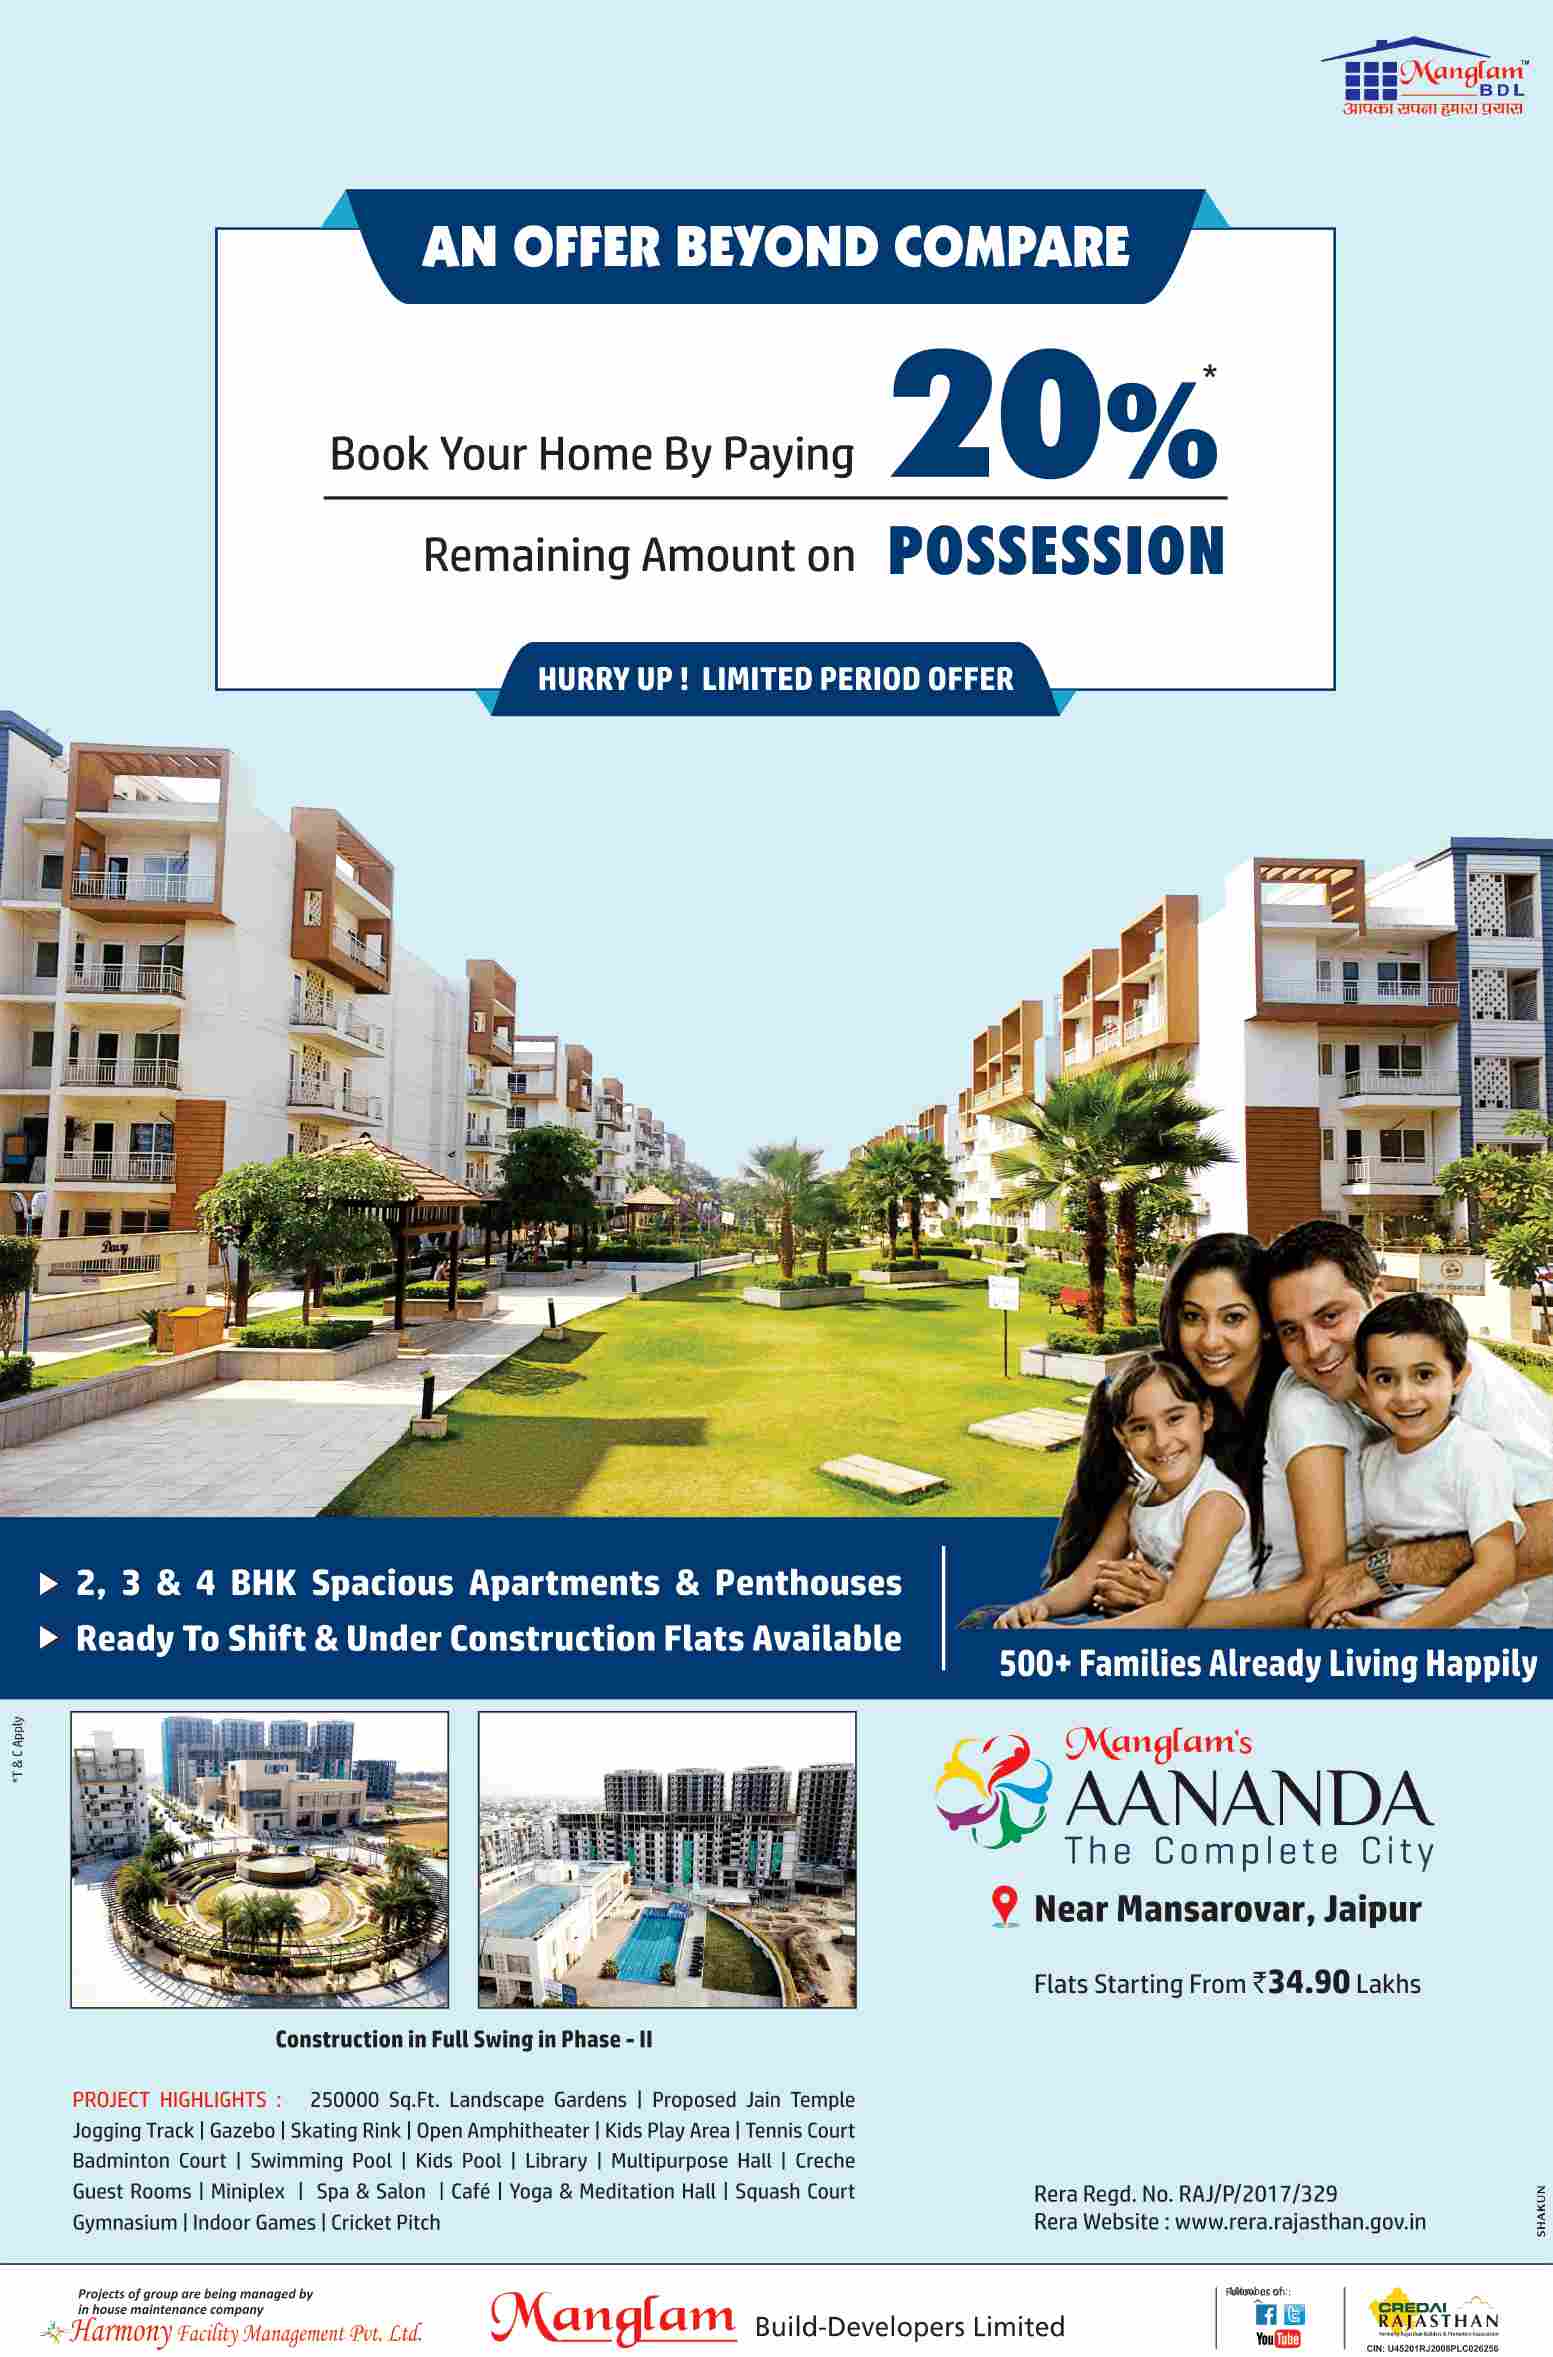 Book by paying 20% and rest on possession at Manglam Aananda in Jaipur